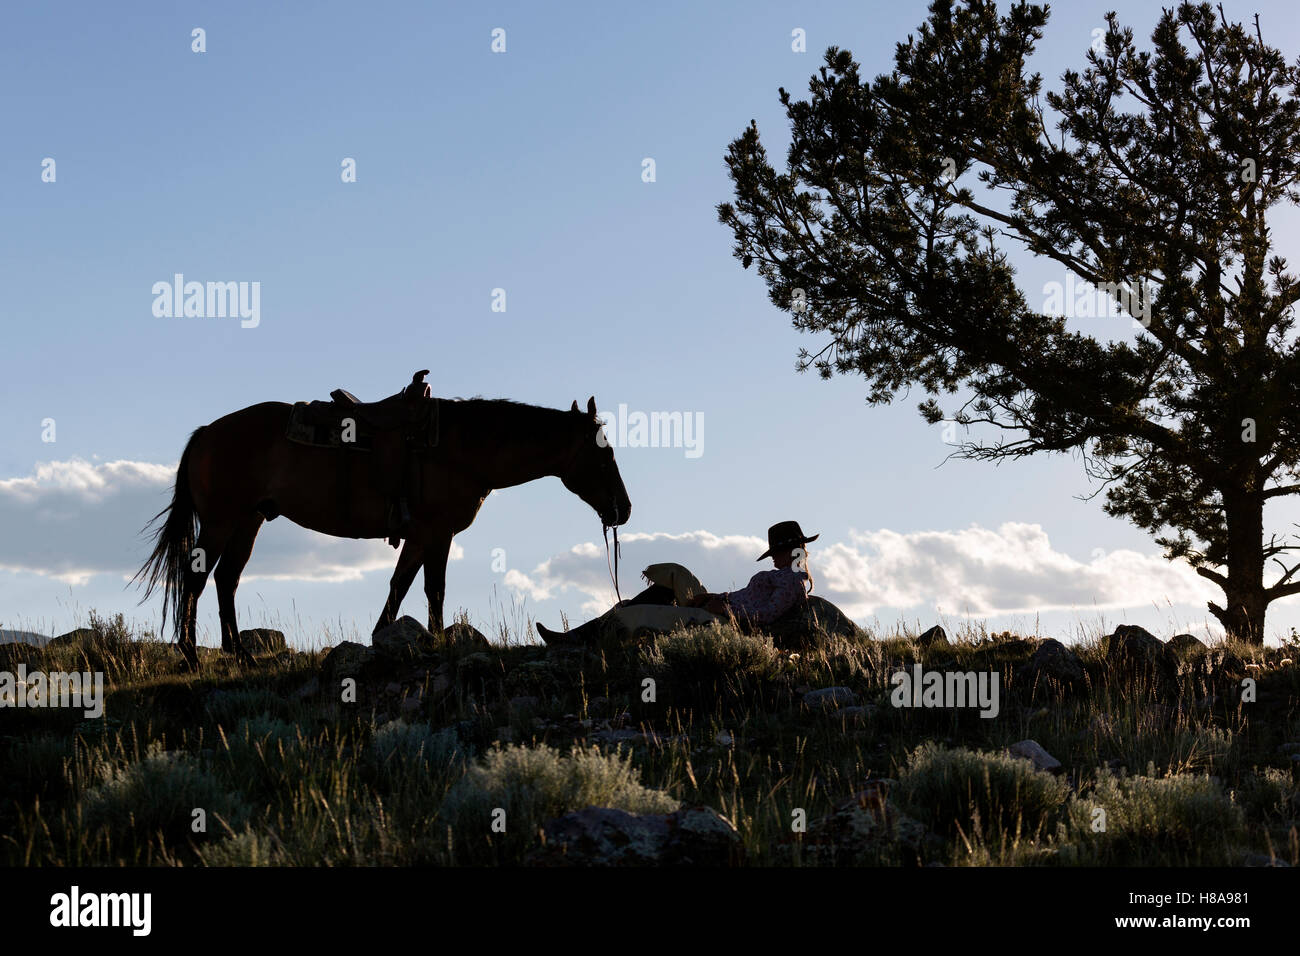 WY01116-00...WYOMING - Emily Melvin relaxing with her horse near Dubois. (MR# M17) Stock Photo